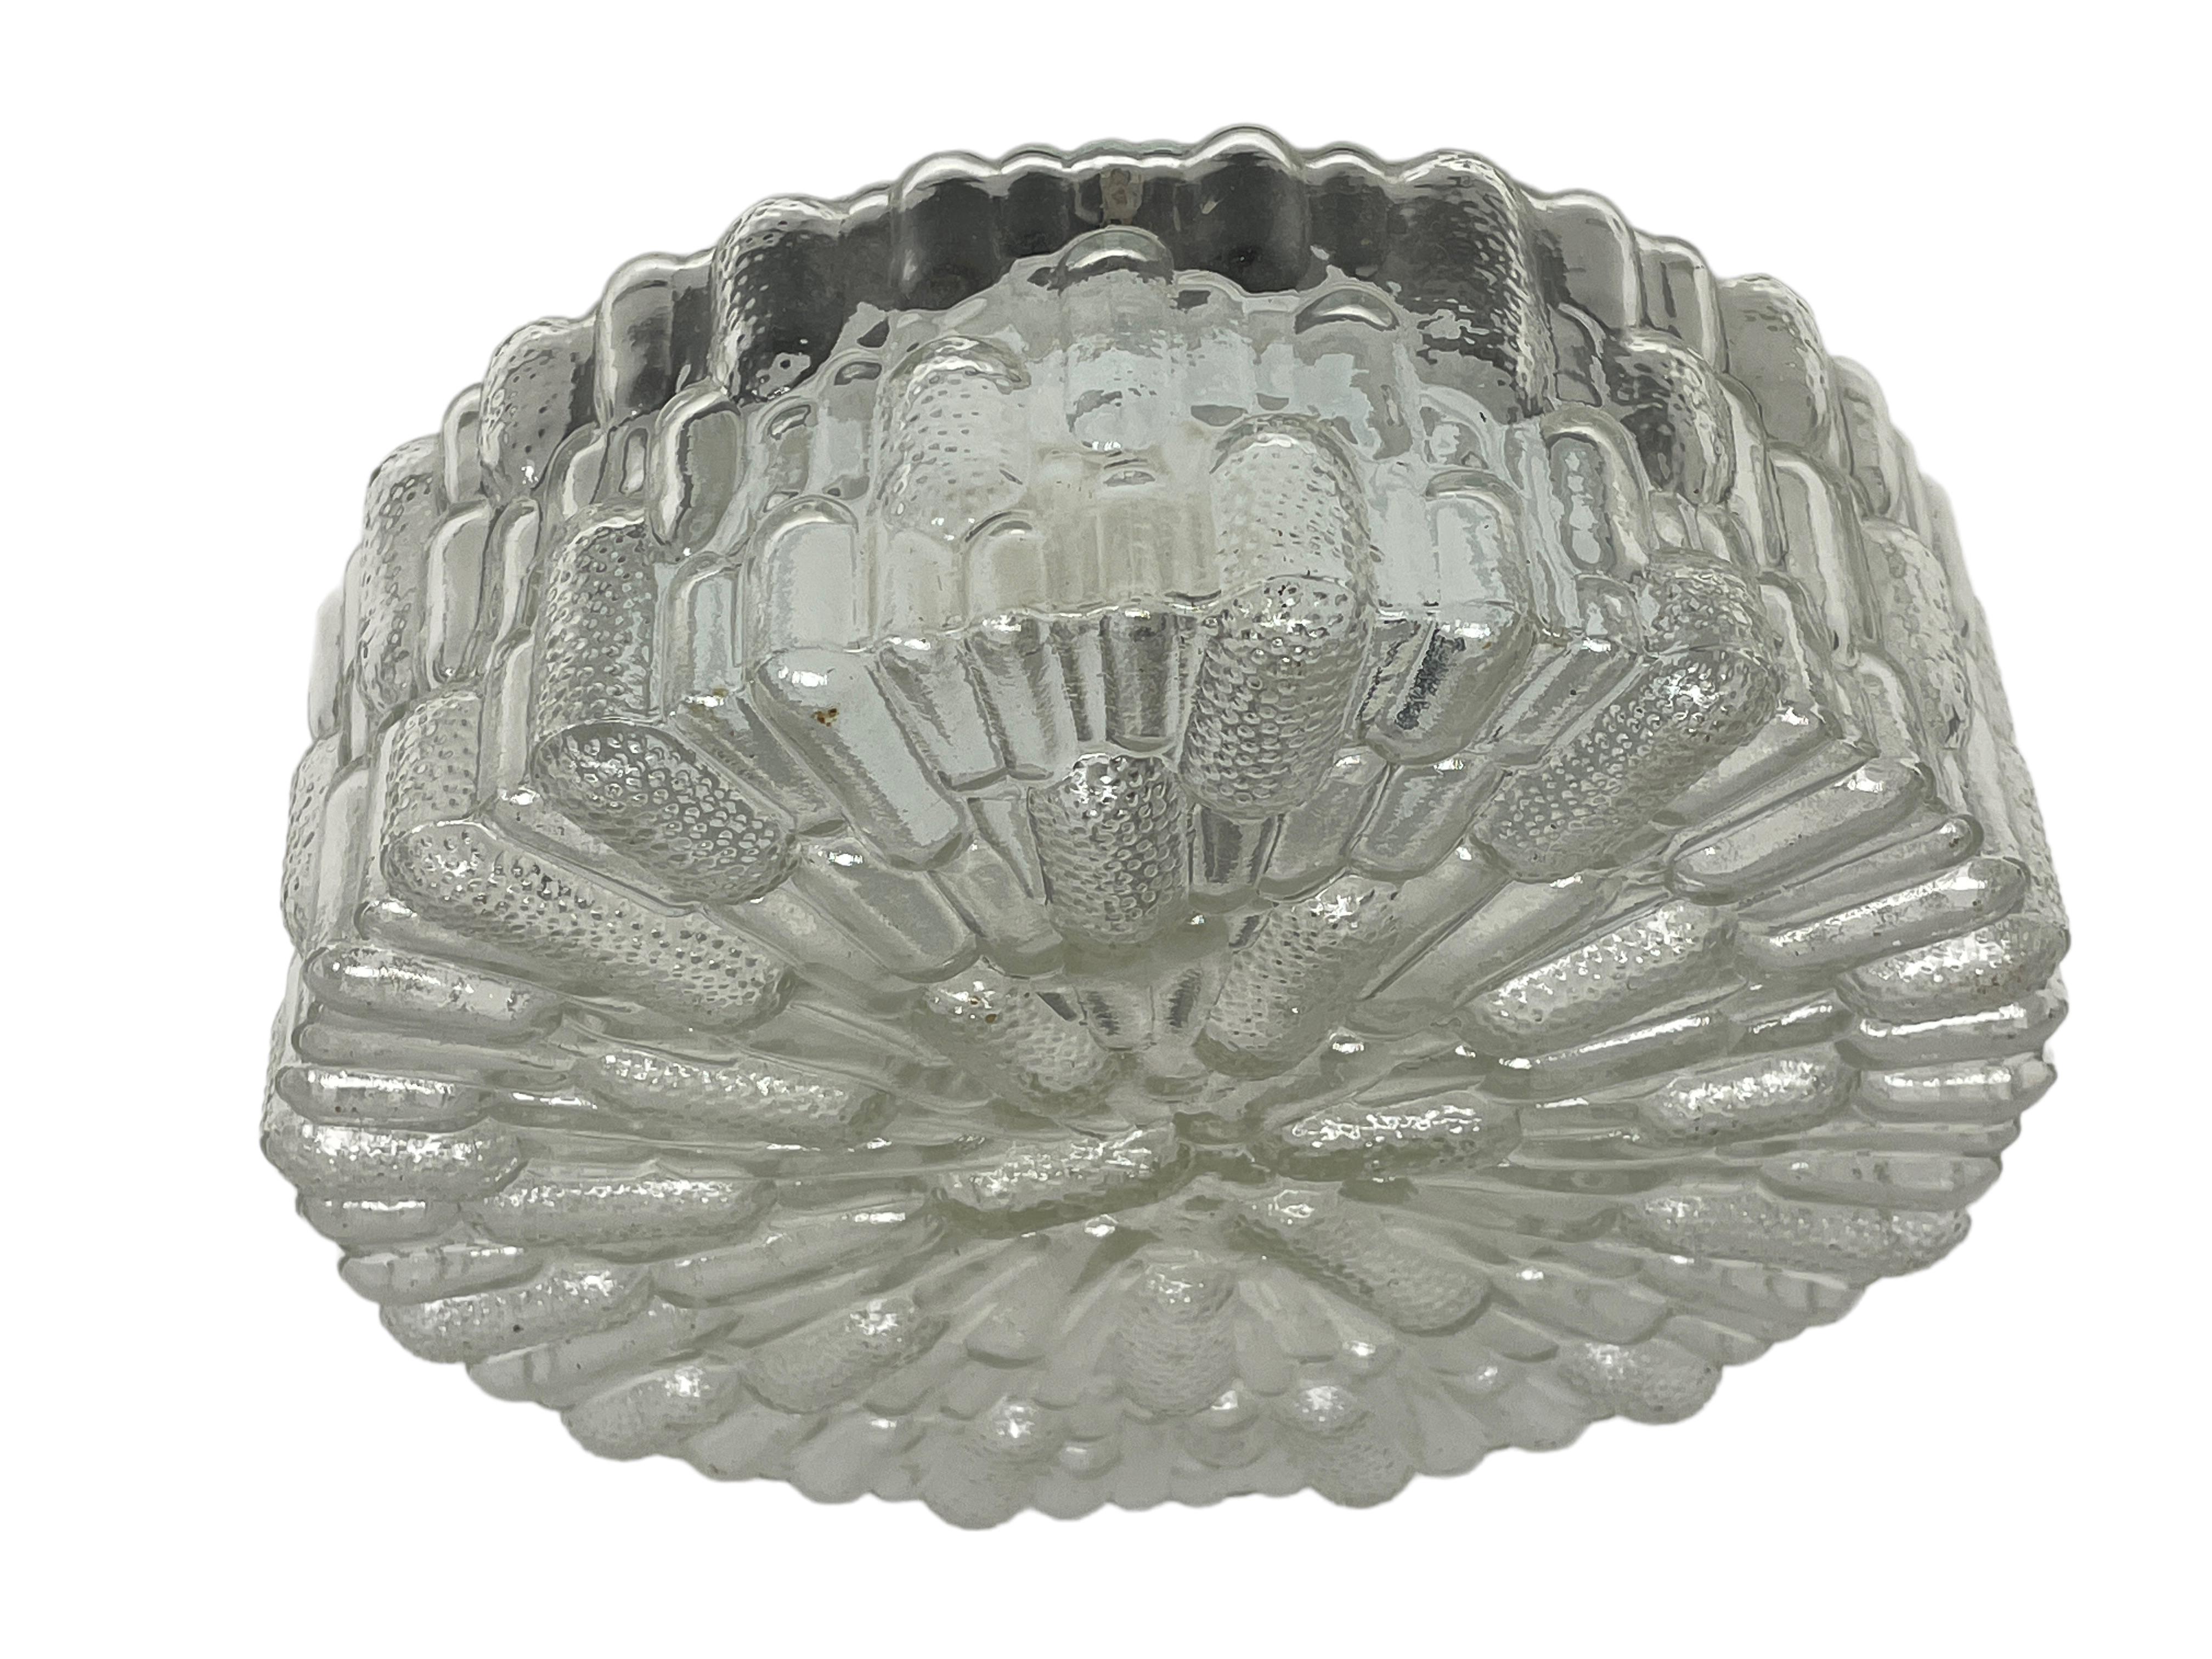 Beautiful bubble glass pattern flush mount. Made in Germany, Massive Leuchten. Gorgeous textured glass flush mount with metal fixture. The fixture requires one European E27 Edison or Medium bulb up to 60 watts. A nice addition to any room.